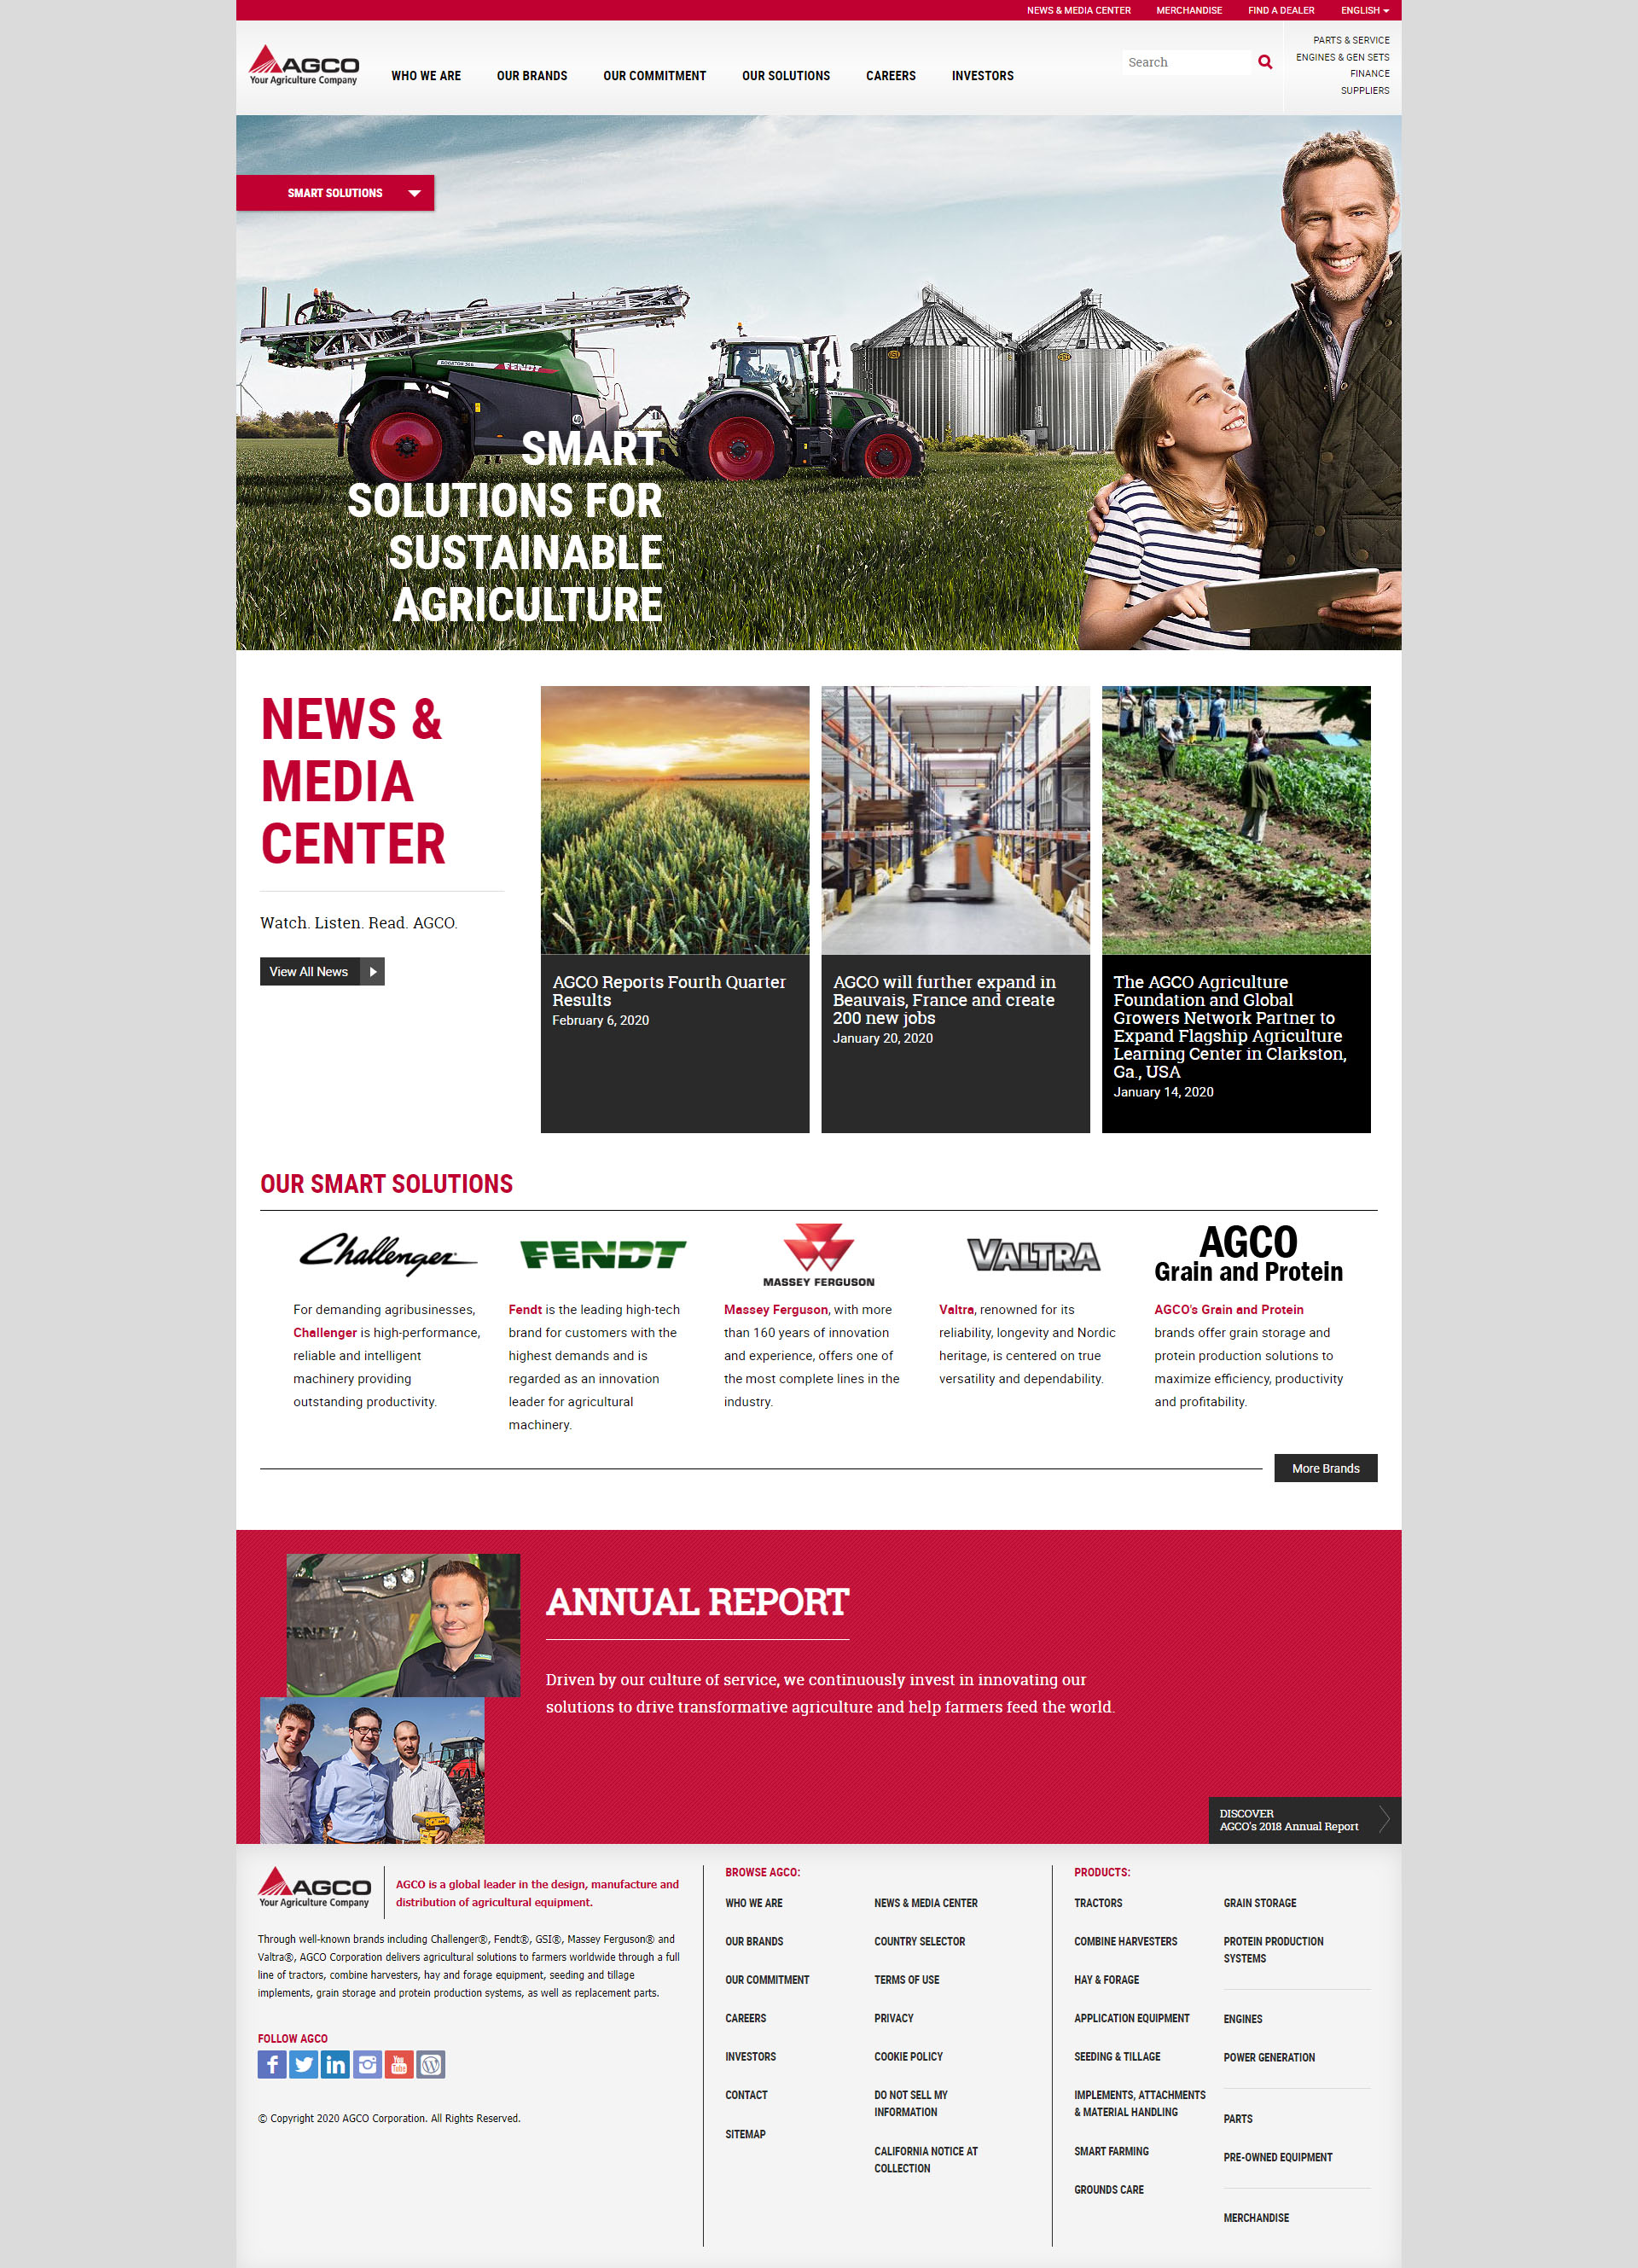 Previous Agricultural Manufacturing Website Design Sample